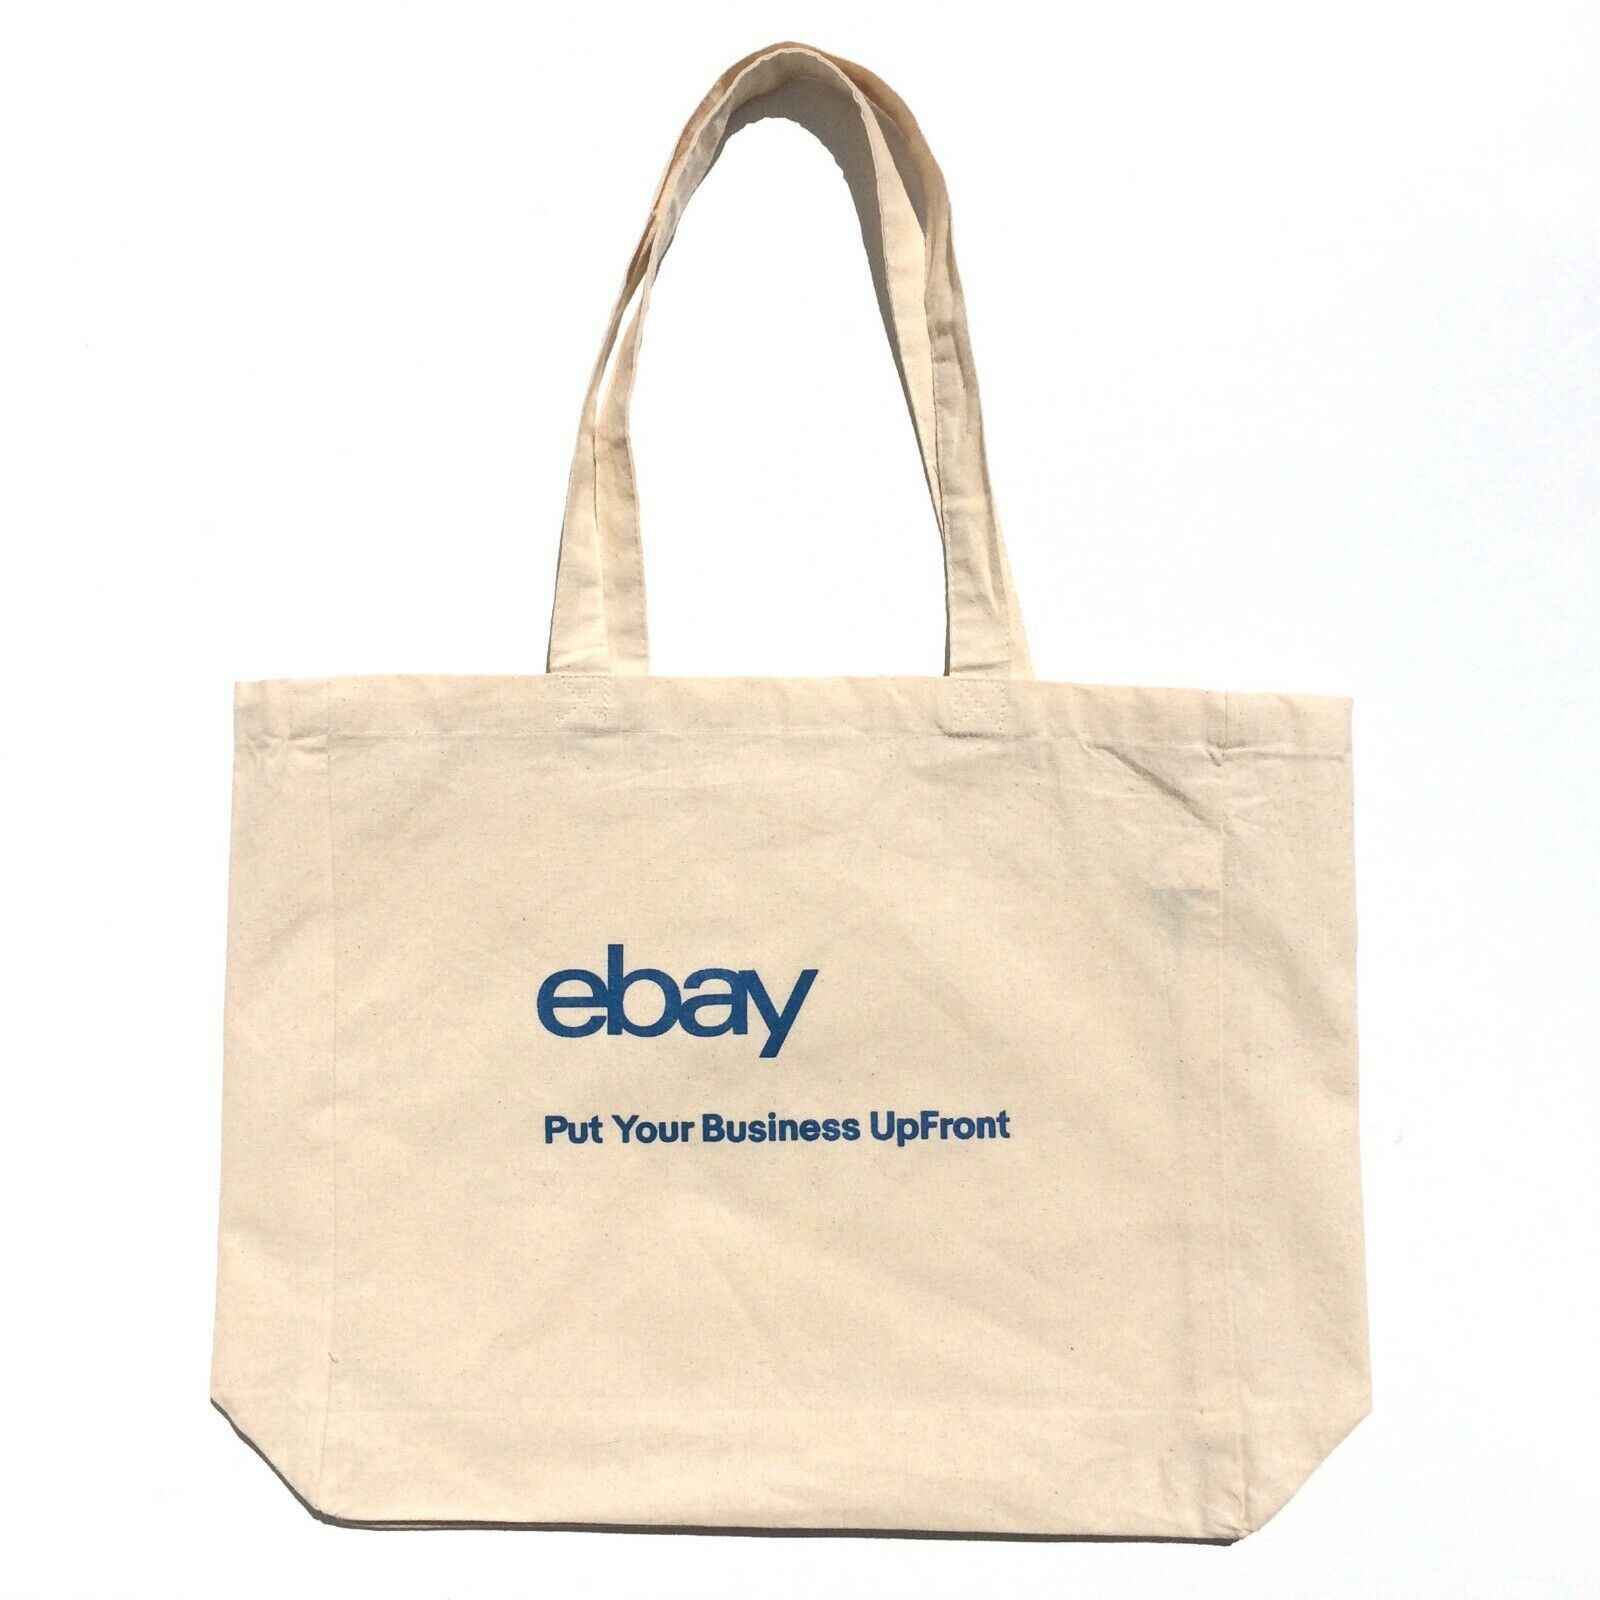 Live! BOSTON 2007 Convention  / USPS Zippered Tote Bag w/ Carry  Strap